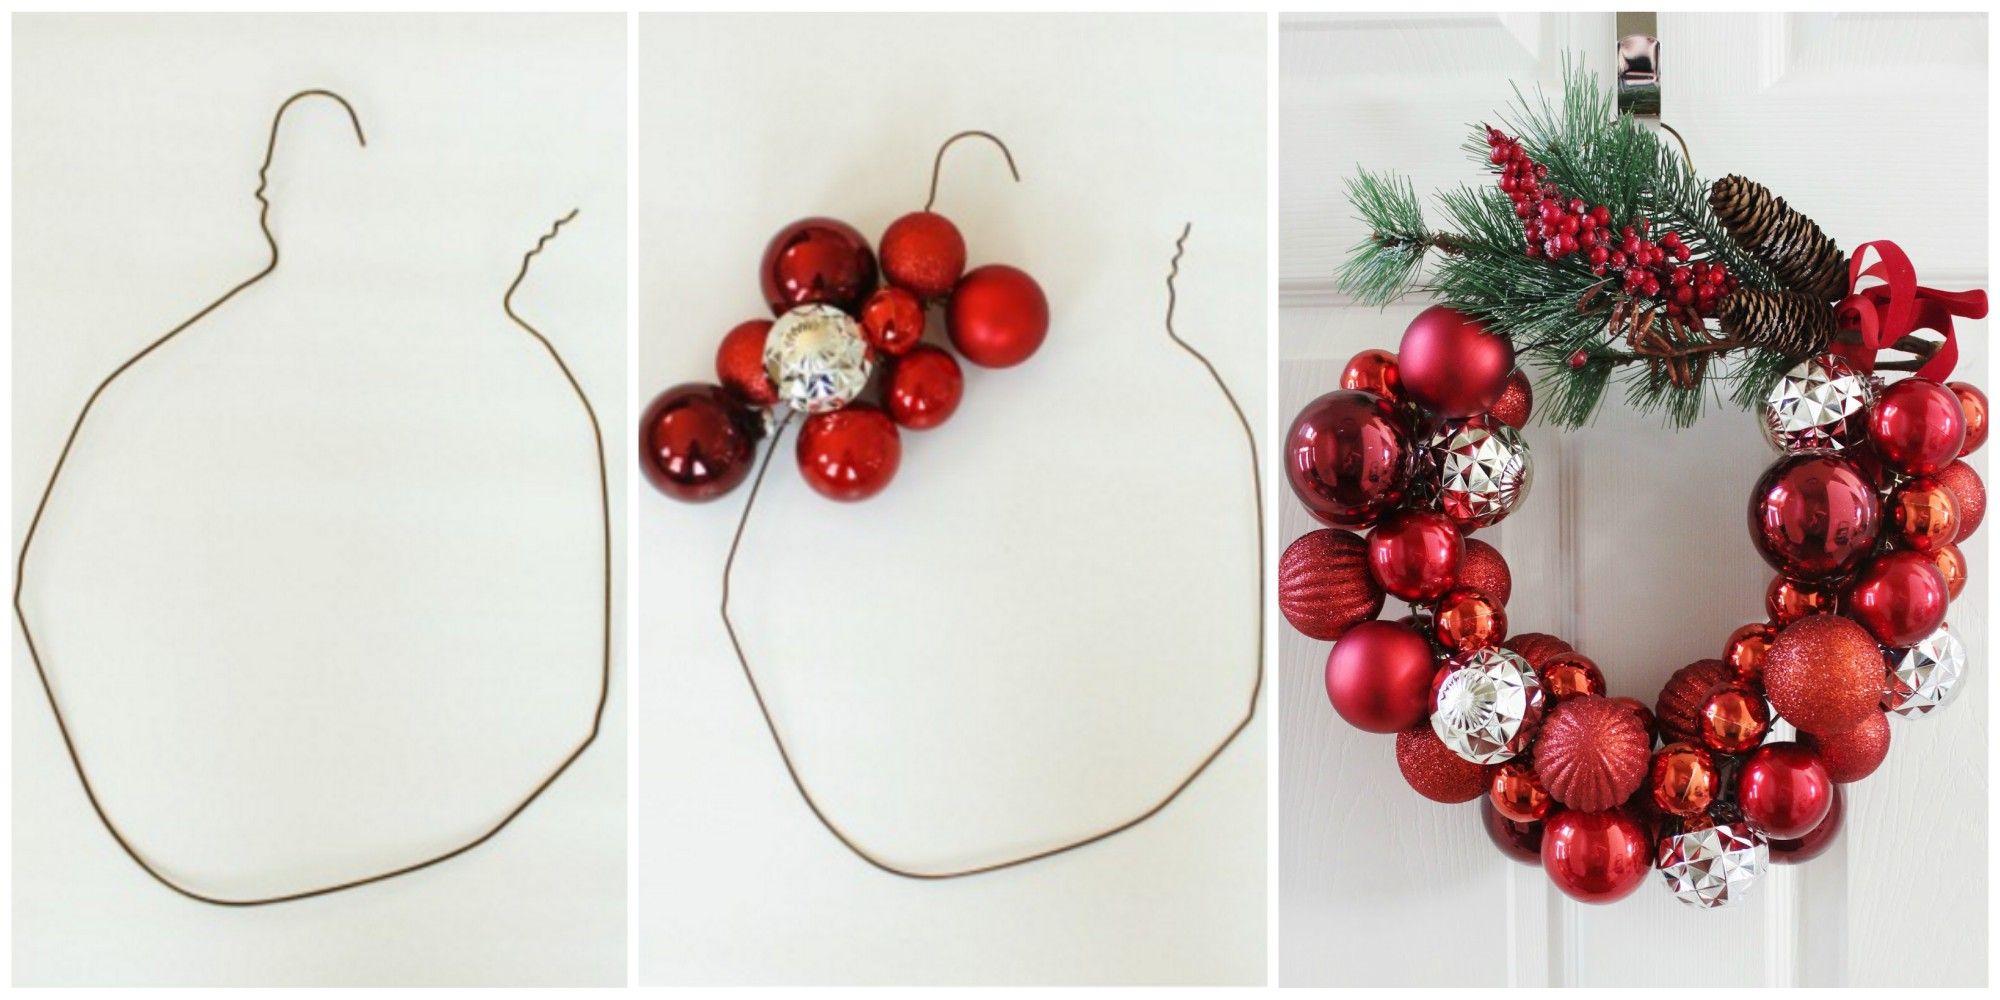 DIY Wire Coat Hanger Evergreen Christmas Wreath - Jenna Kate at Home